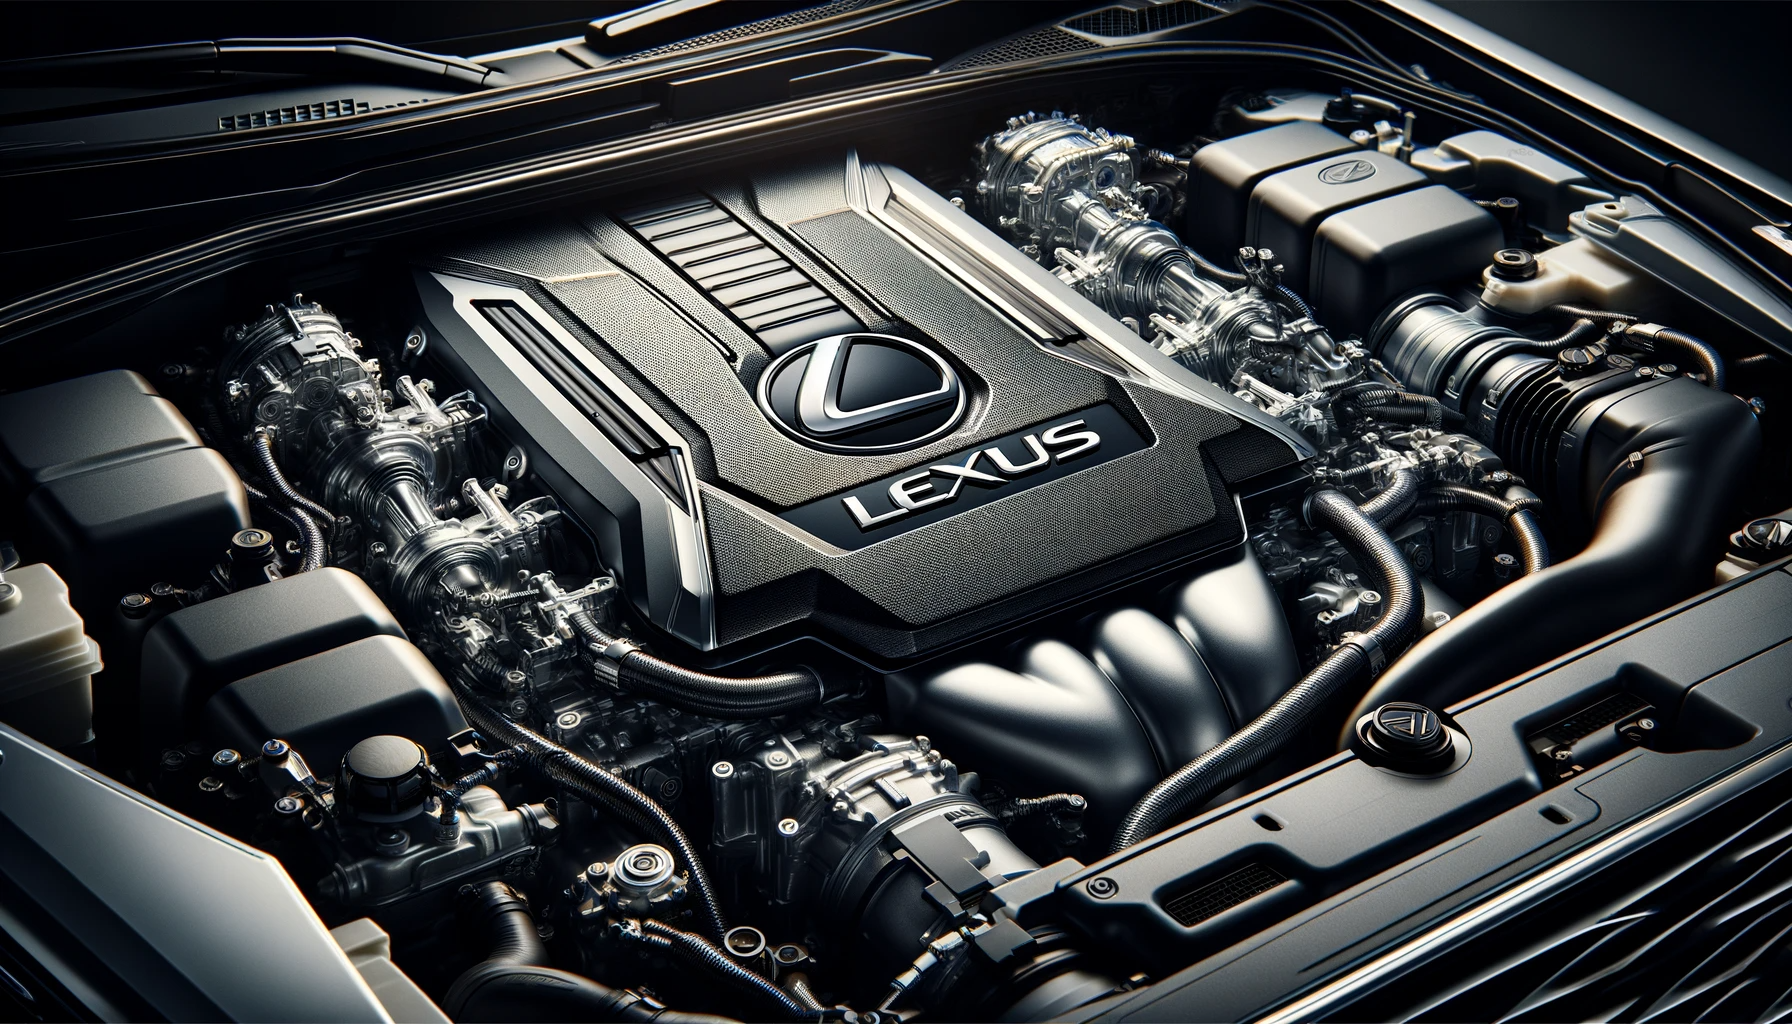 A detailed view of the GX550s twin turbo V 6 engine